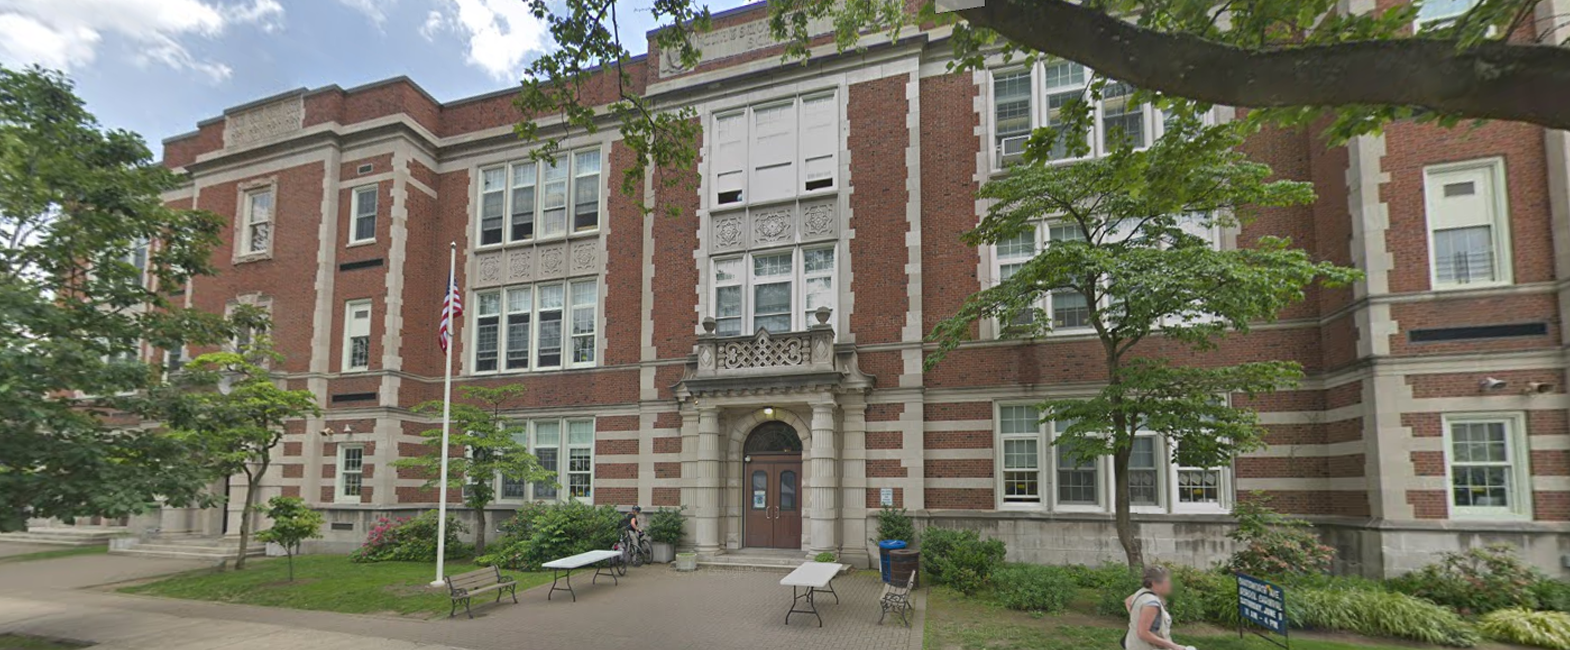 Search Real Estate Listings with Chatsworth Avenue Elementary School District, part of the Mamaroneck School District.